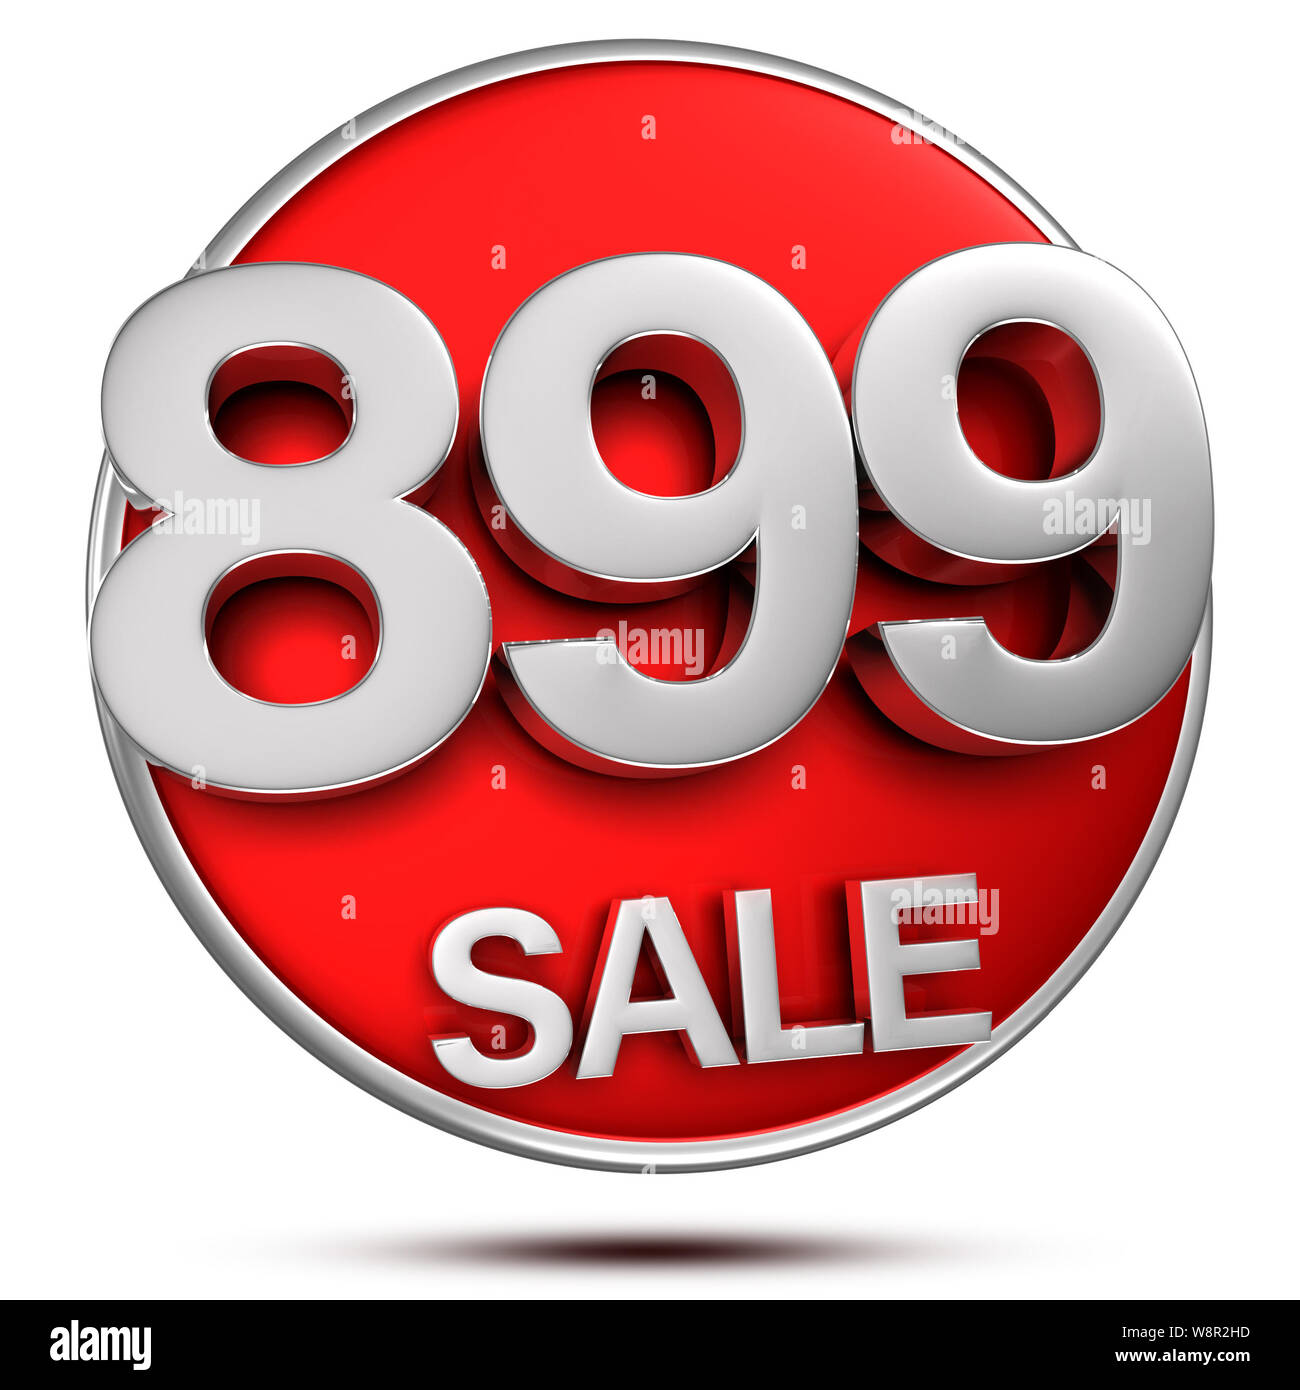 899 sale 3d rendering on white background.(with Clipping Path). Stock Photo